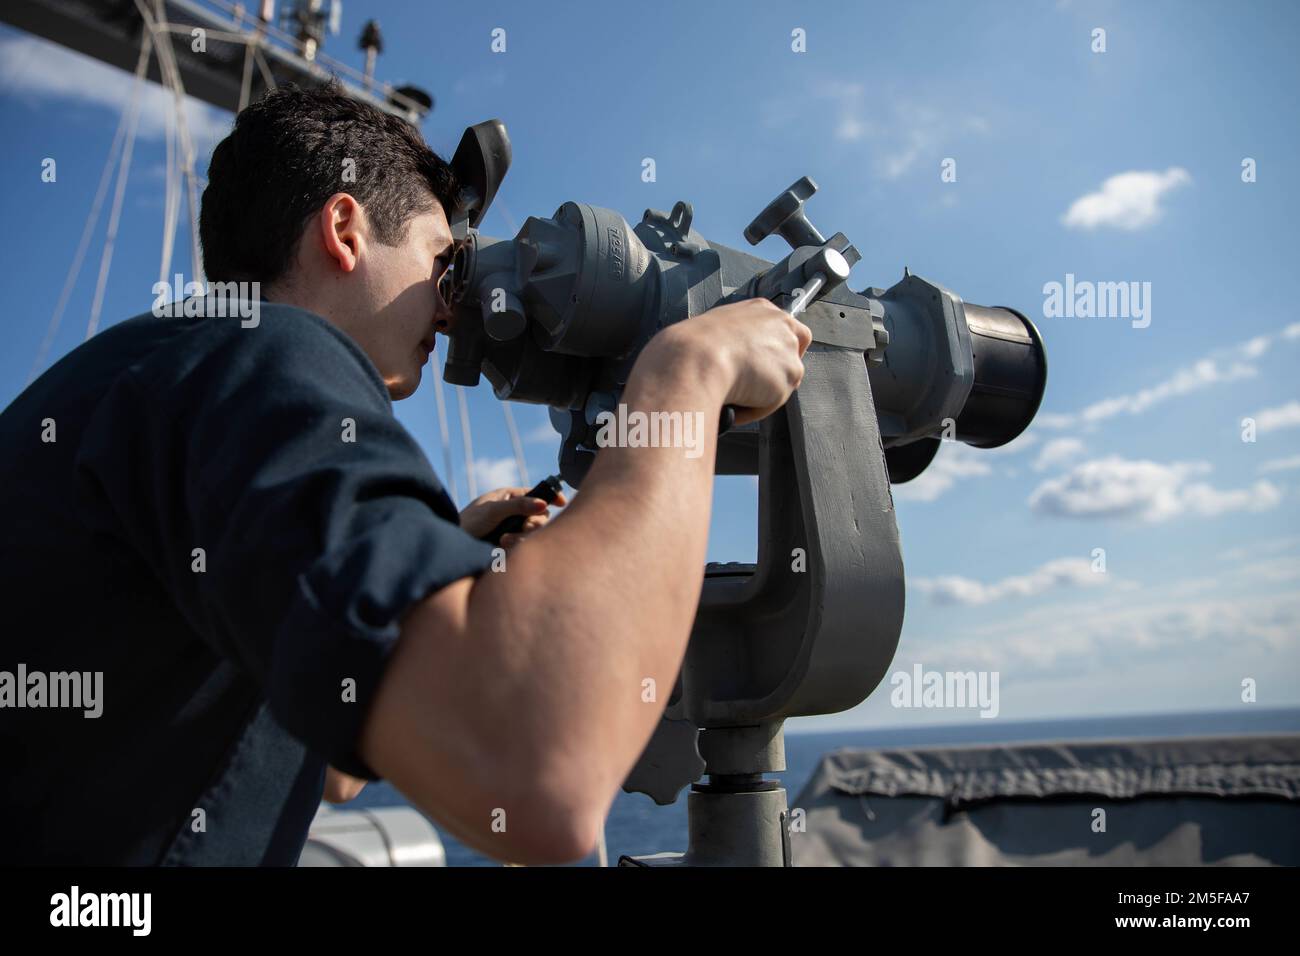 220311-N-QI593-1037 IONIAN SEA (Mar. 11, 2022) Lt. j.g. Alex Dale, from Fairfax, Virginia, scans for surface contacts aboard the Nimitz-class aircraft carrier USS Harry S. Truman (CVN 75), Mar. 11, 2022. The Harry S. Truman Carrier Strike Group is on a scheduled deployment in the U.S. Sixth Fleet area of operations in support of U.S., allied and partner interests in Europe and Africa. Stock Photo